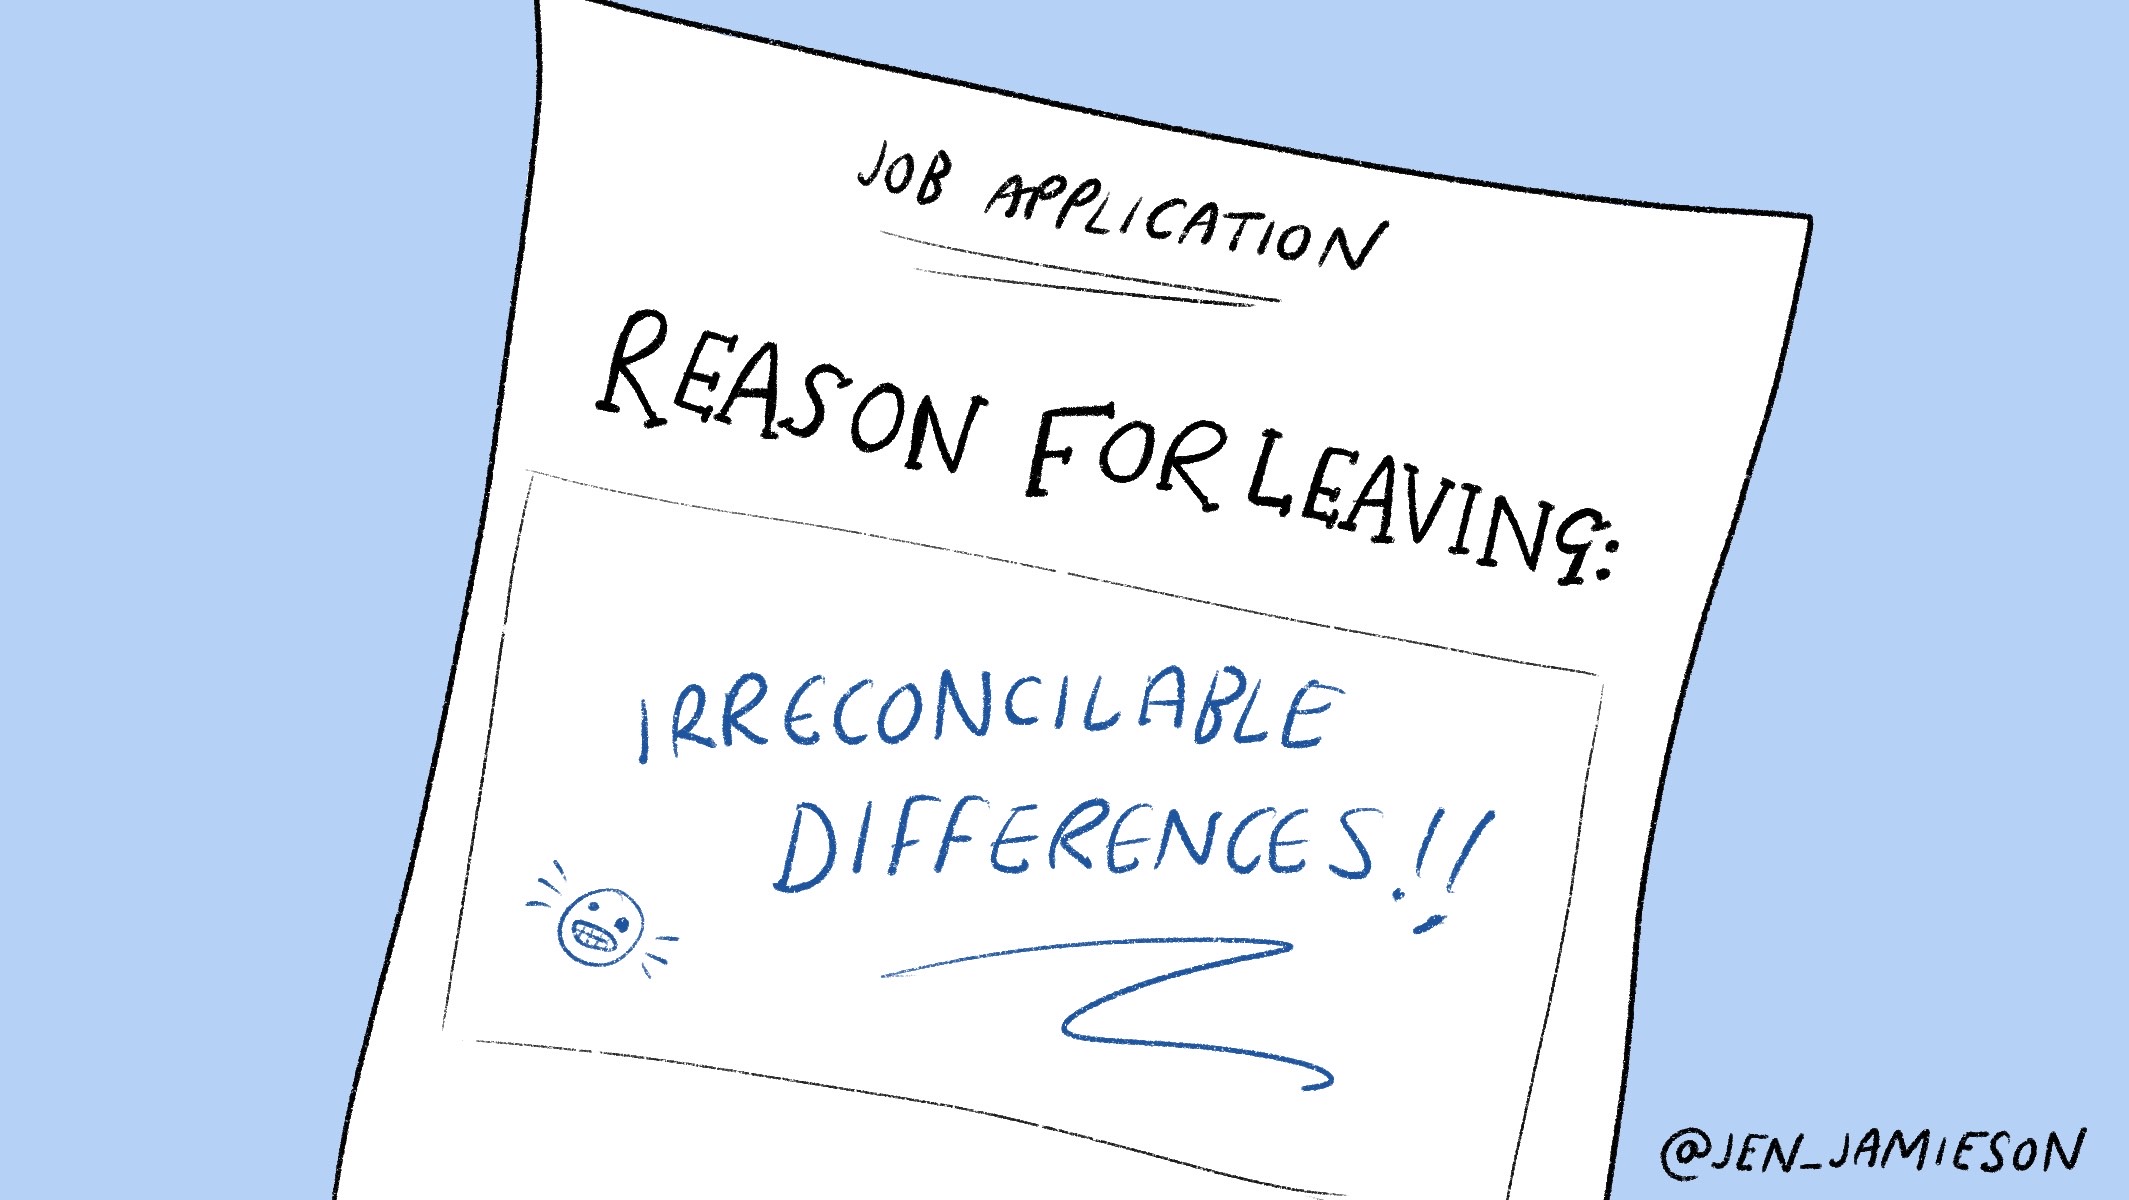 Illustration about whether to lie on reason for leaving part of application